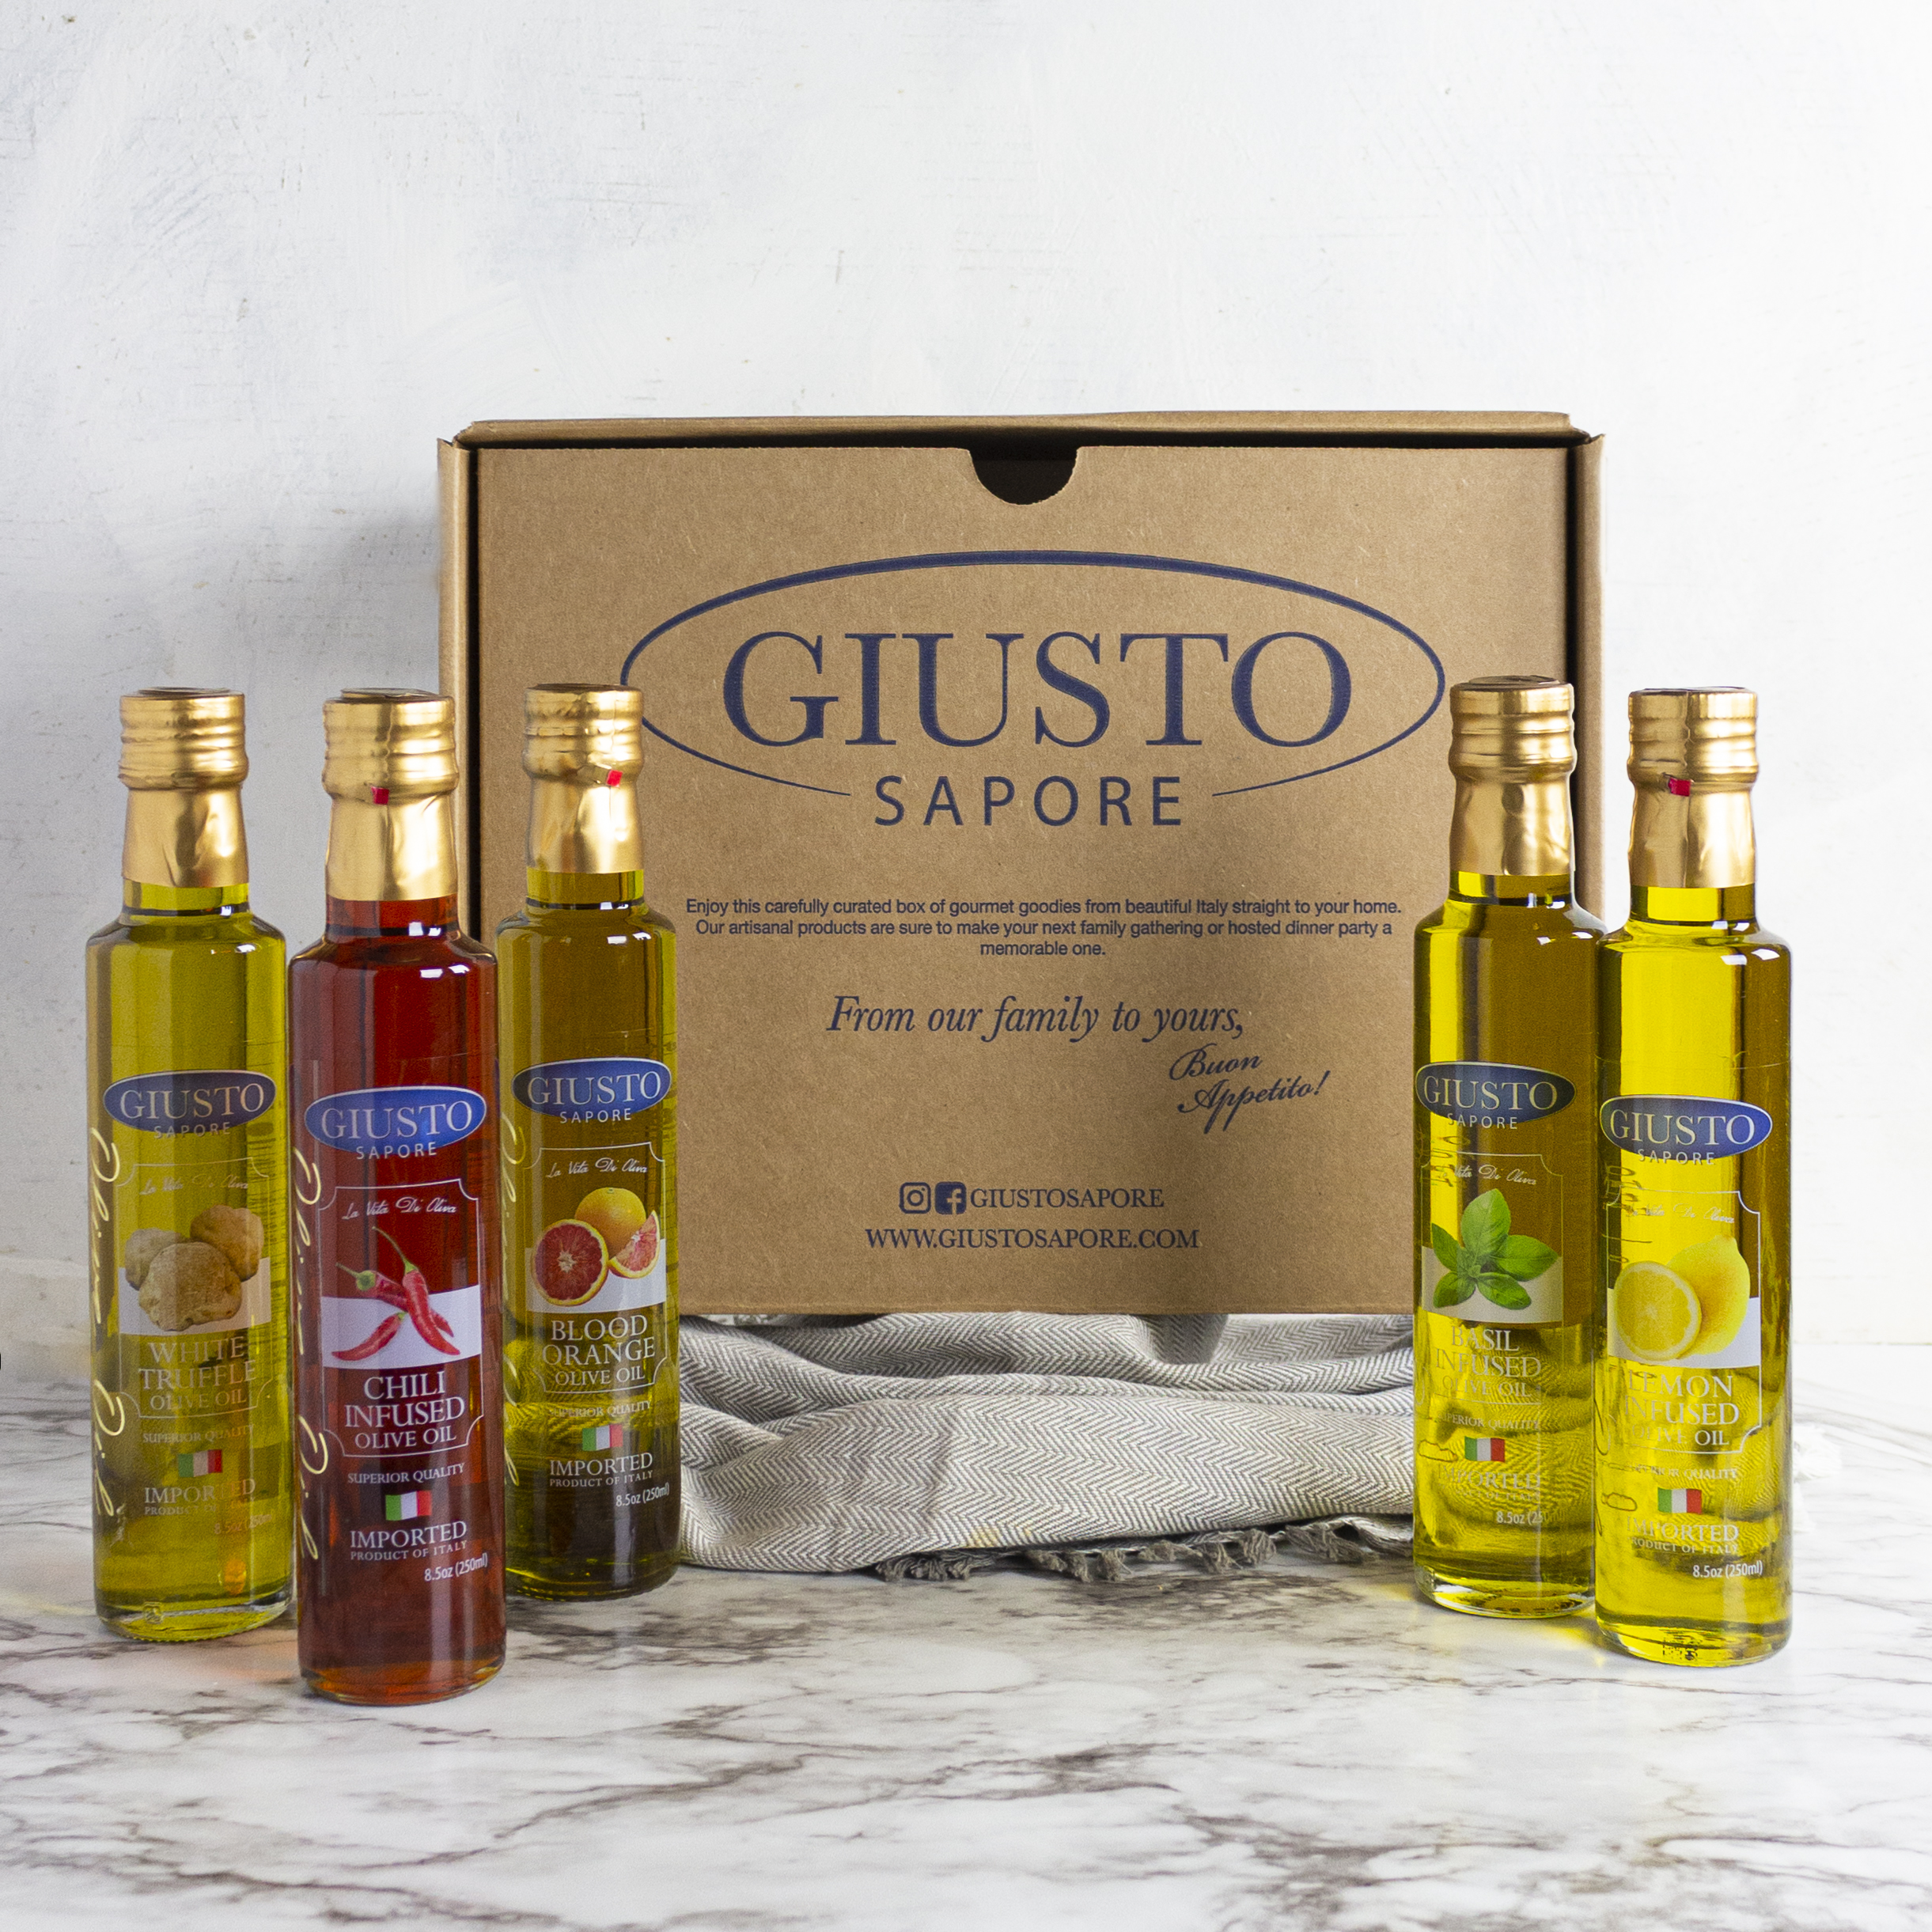 Infused Olive Oil Gift Set 2 credit Giusto Sapore